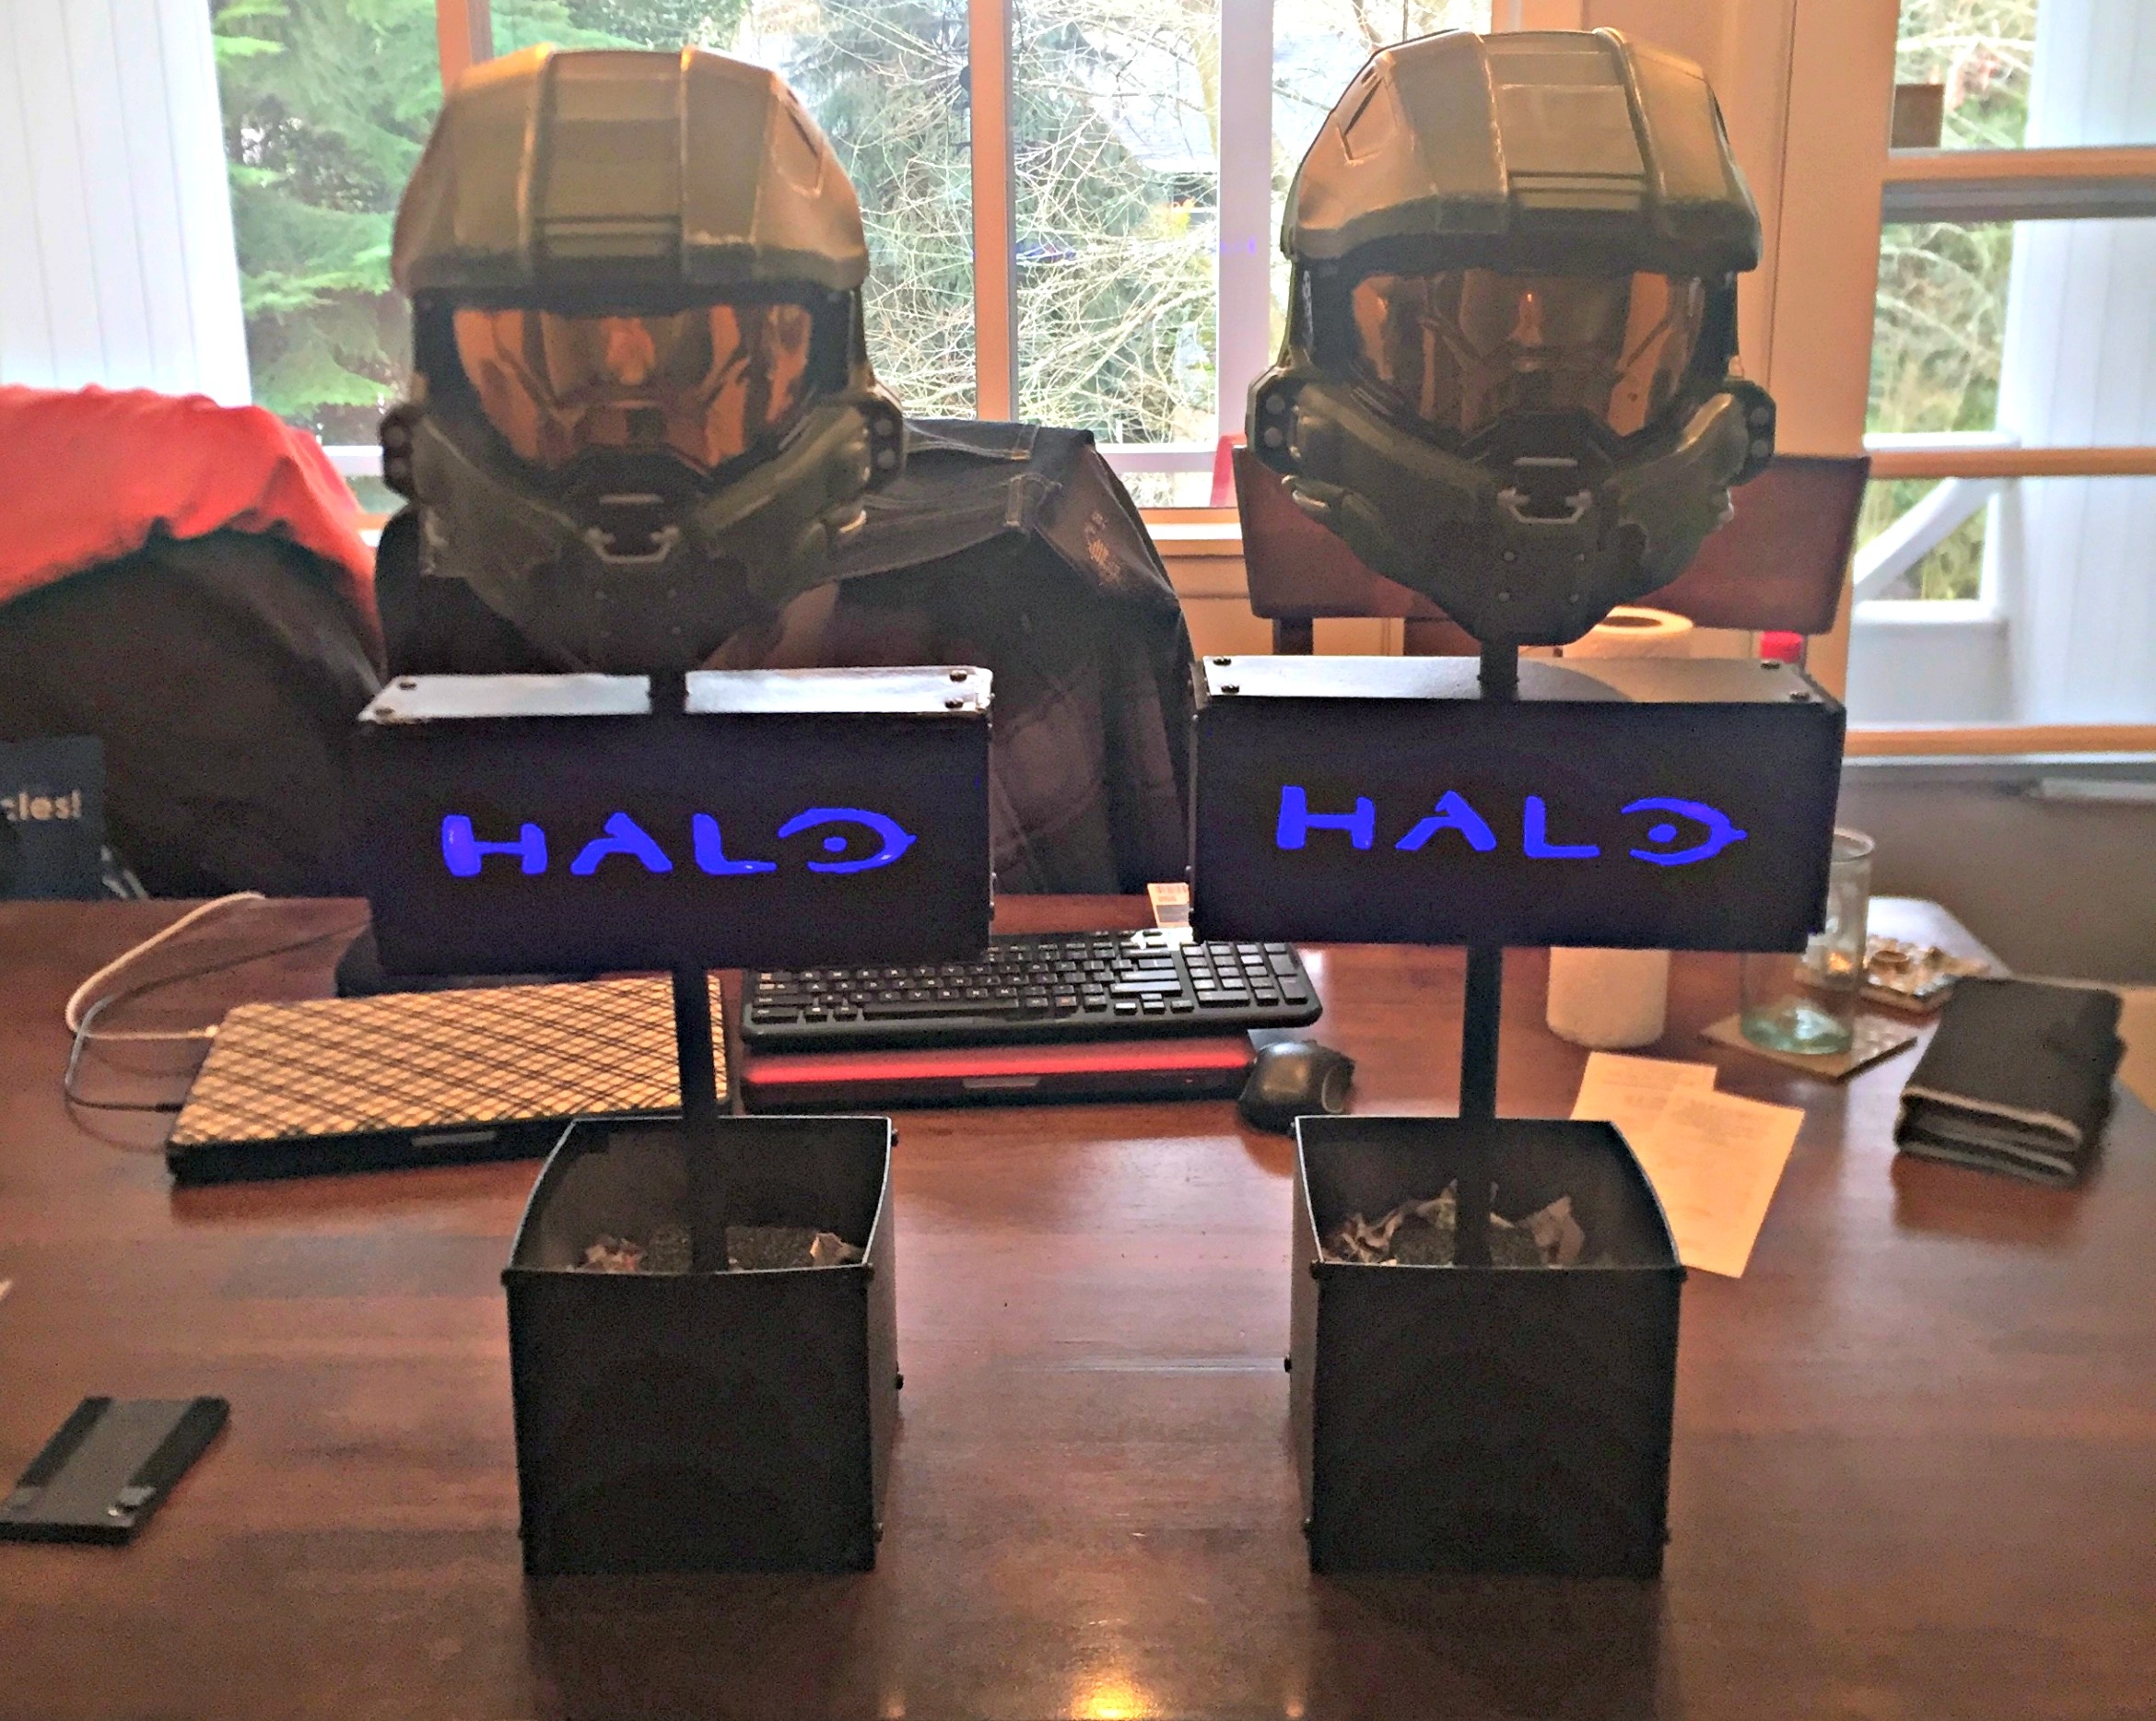 Halo party supplies